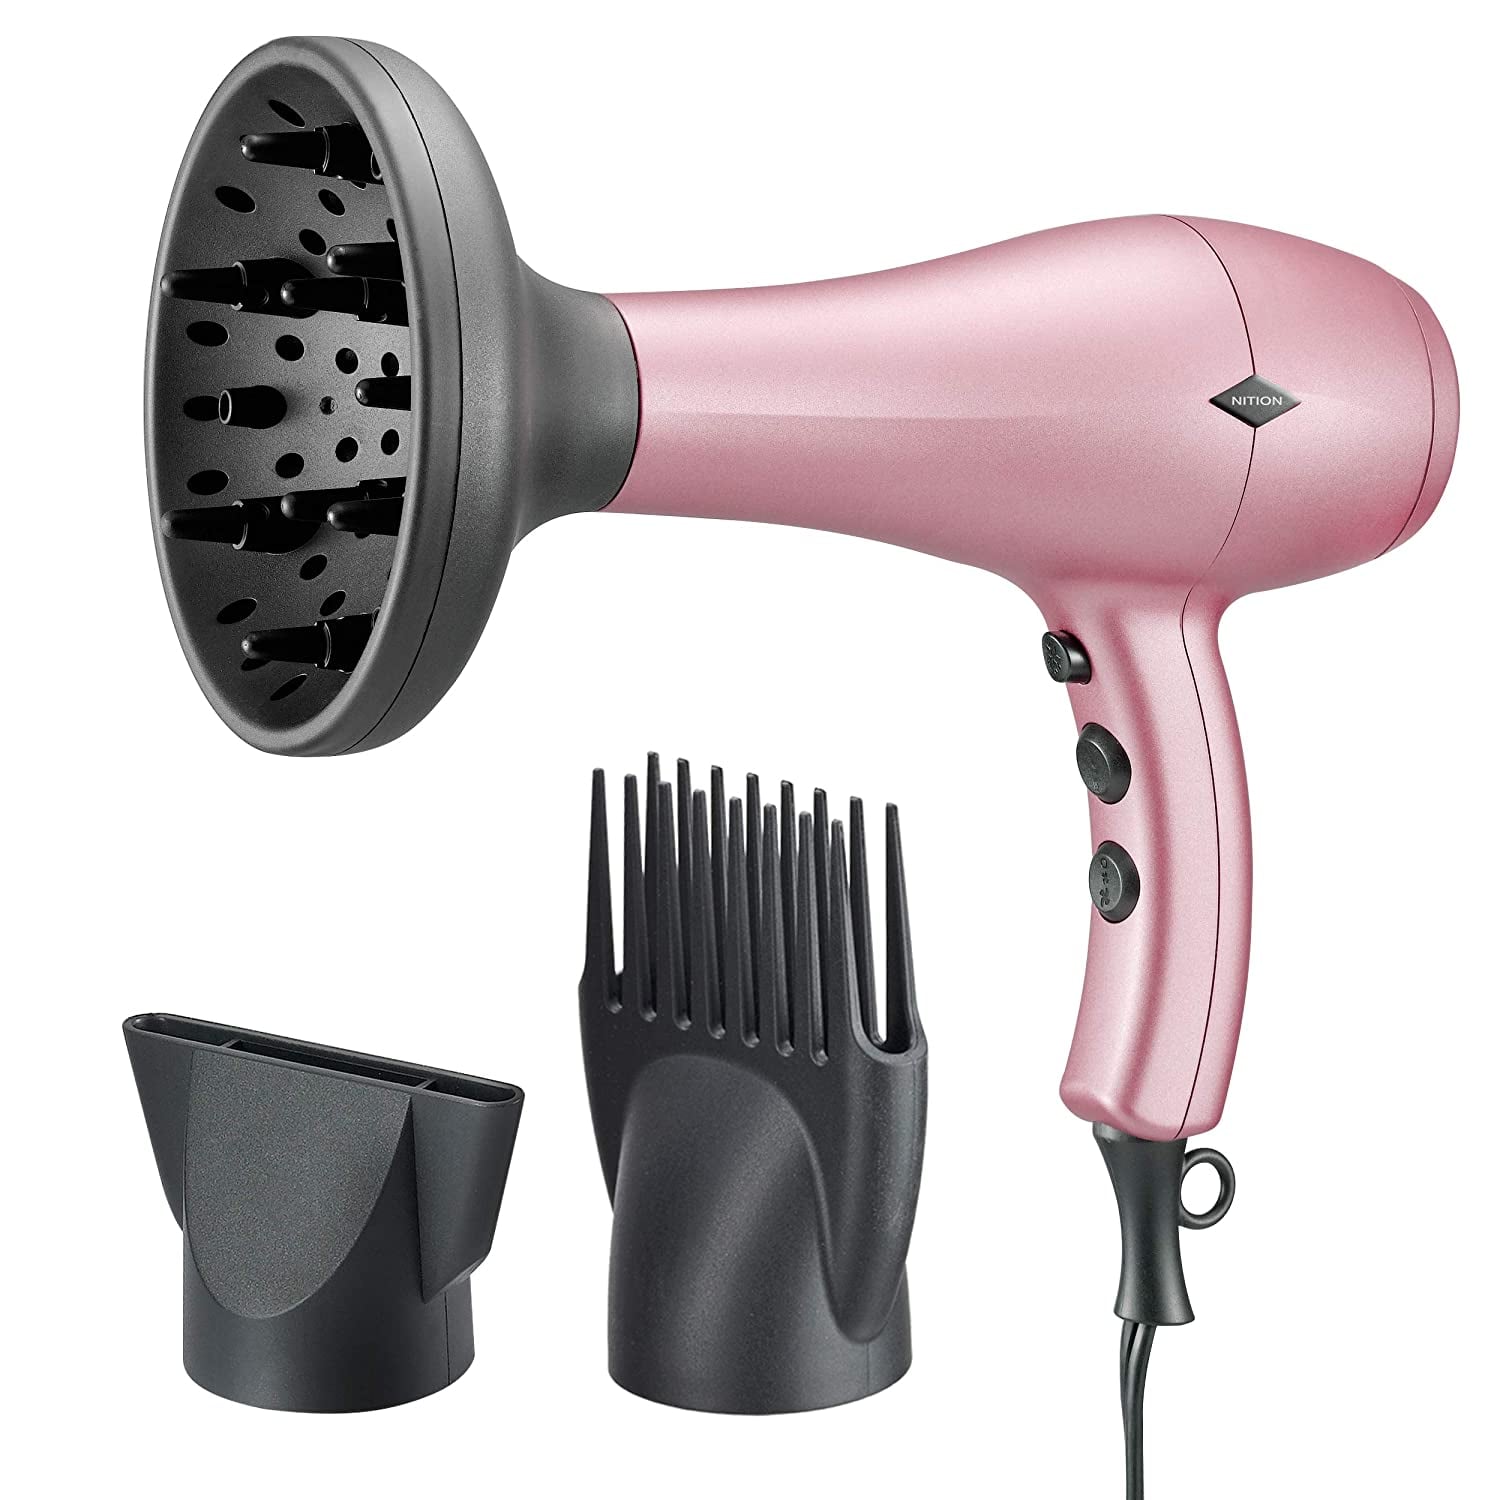 Buy Kabello Hair Dryer Blow Dryer With Hair Brush Salon Accessories For Hair  Pack Of 1M16 Online at Low Prices in India  Amazonin